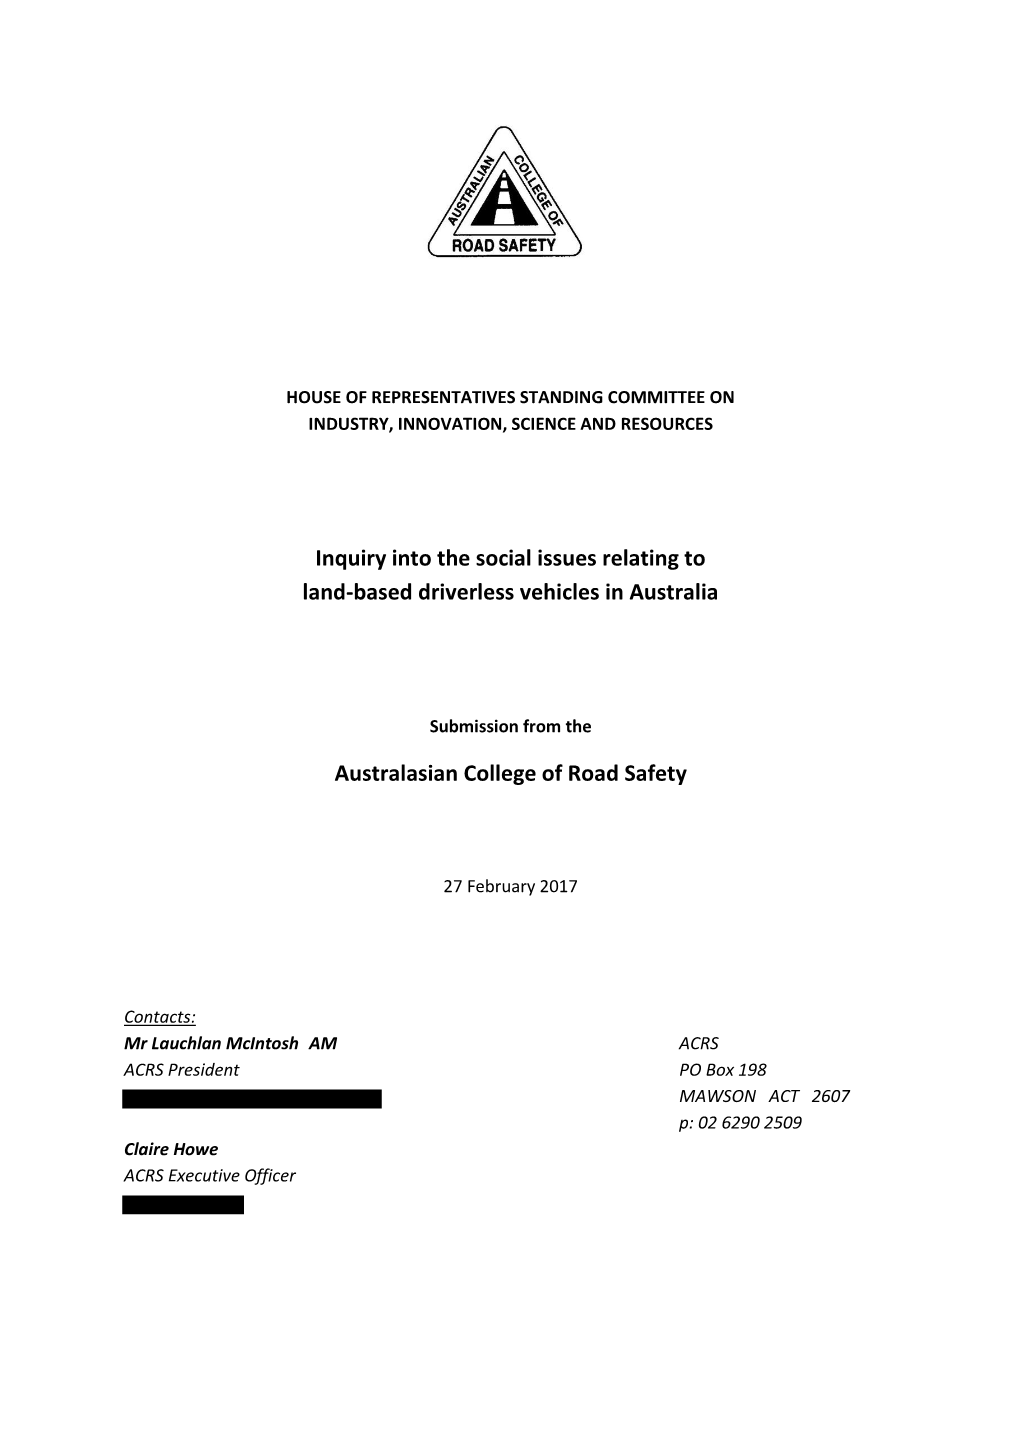 Inquiry Into the Social Issues Relating to Land-Based Driverless Vehicles in Australia Australasian College of Road Safety